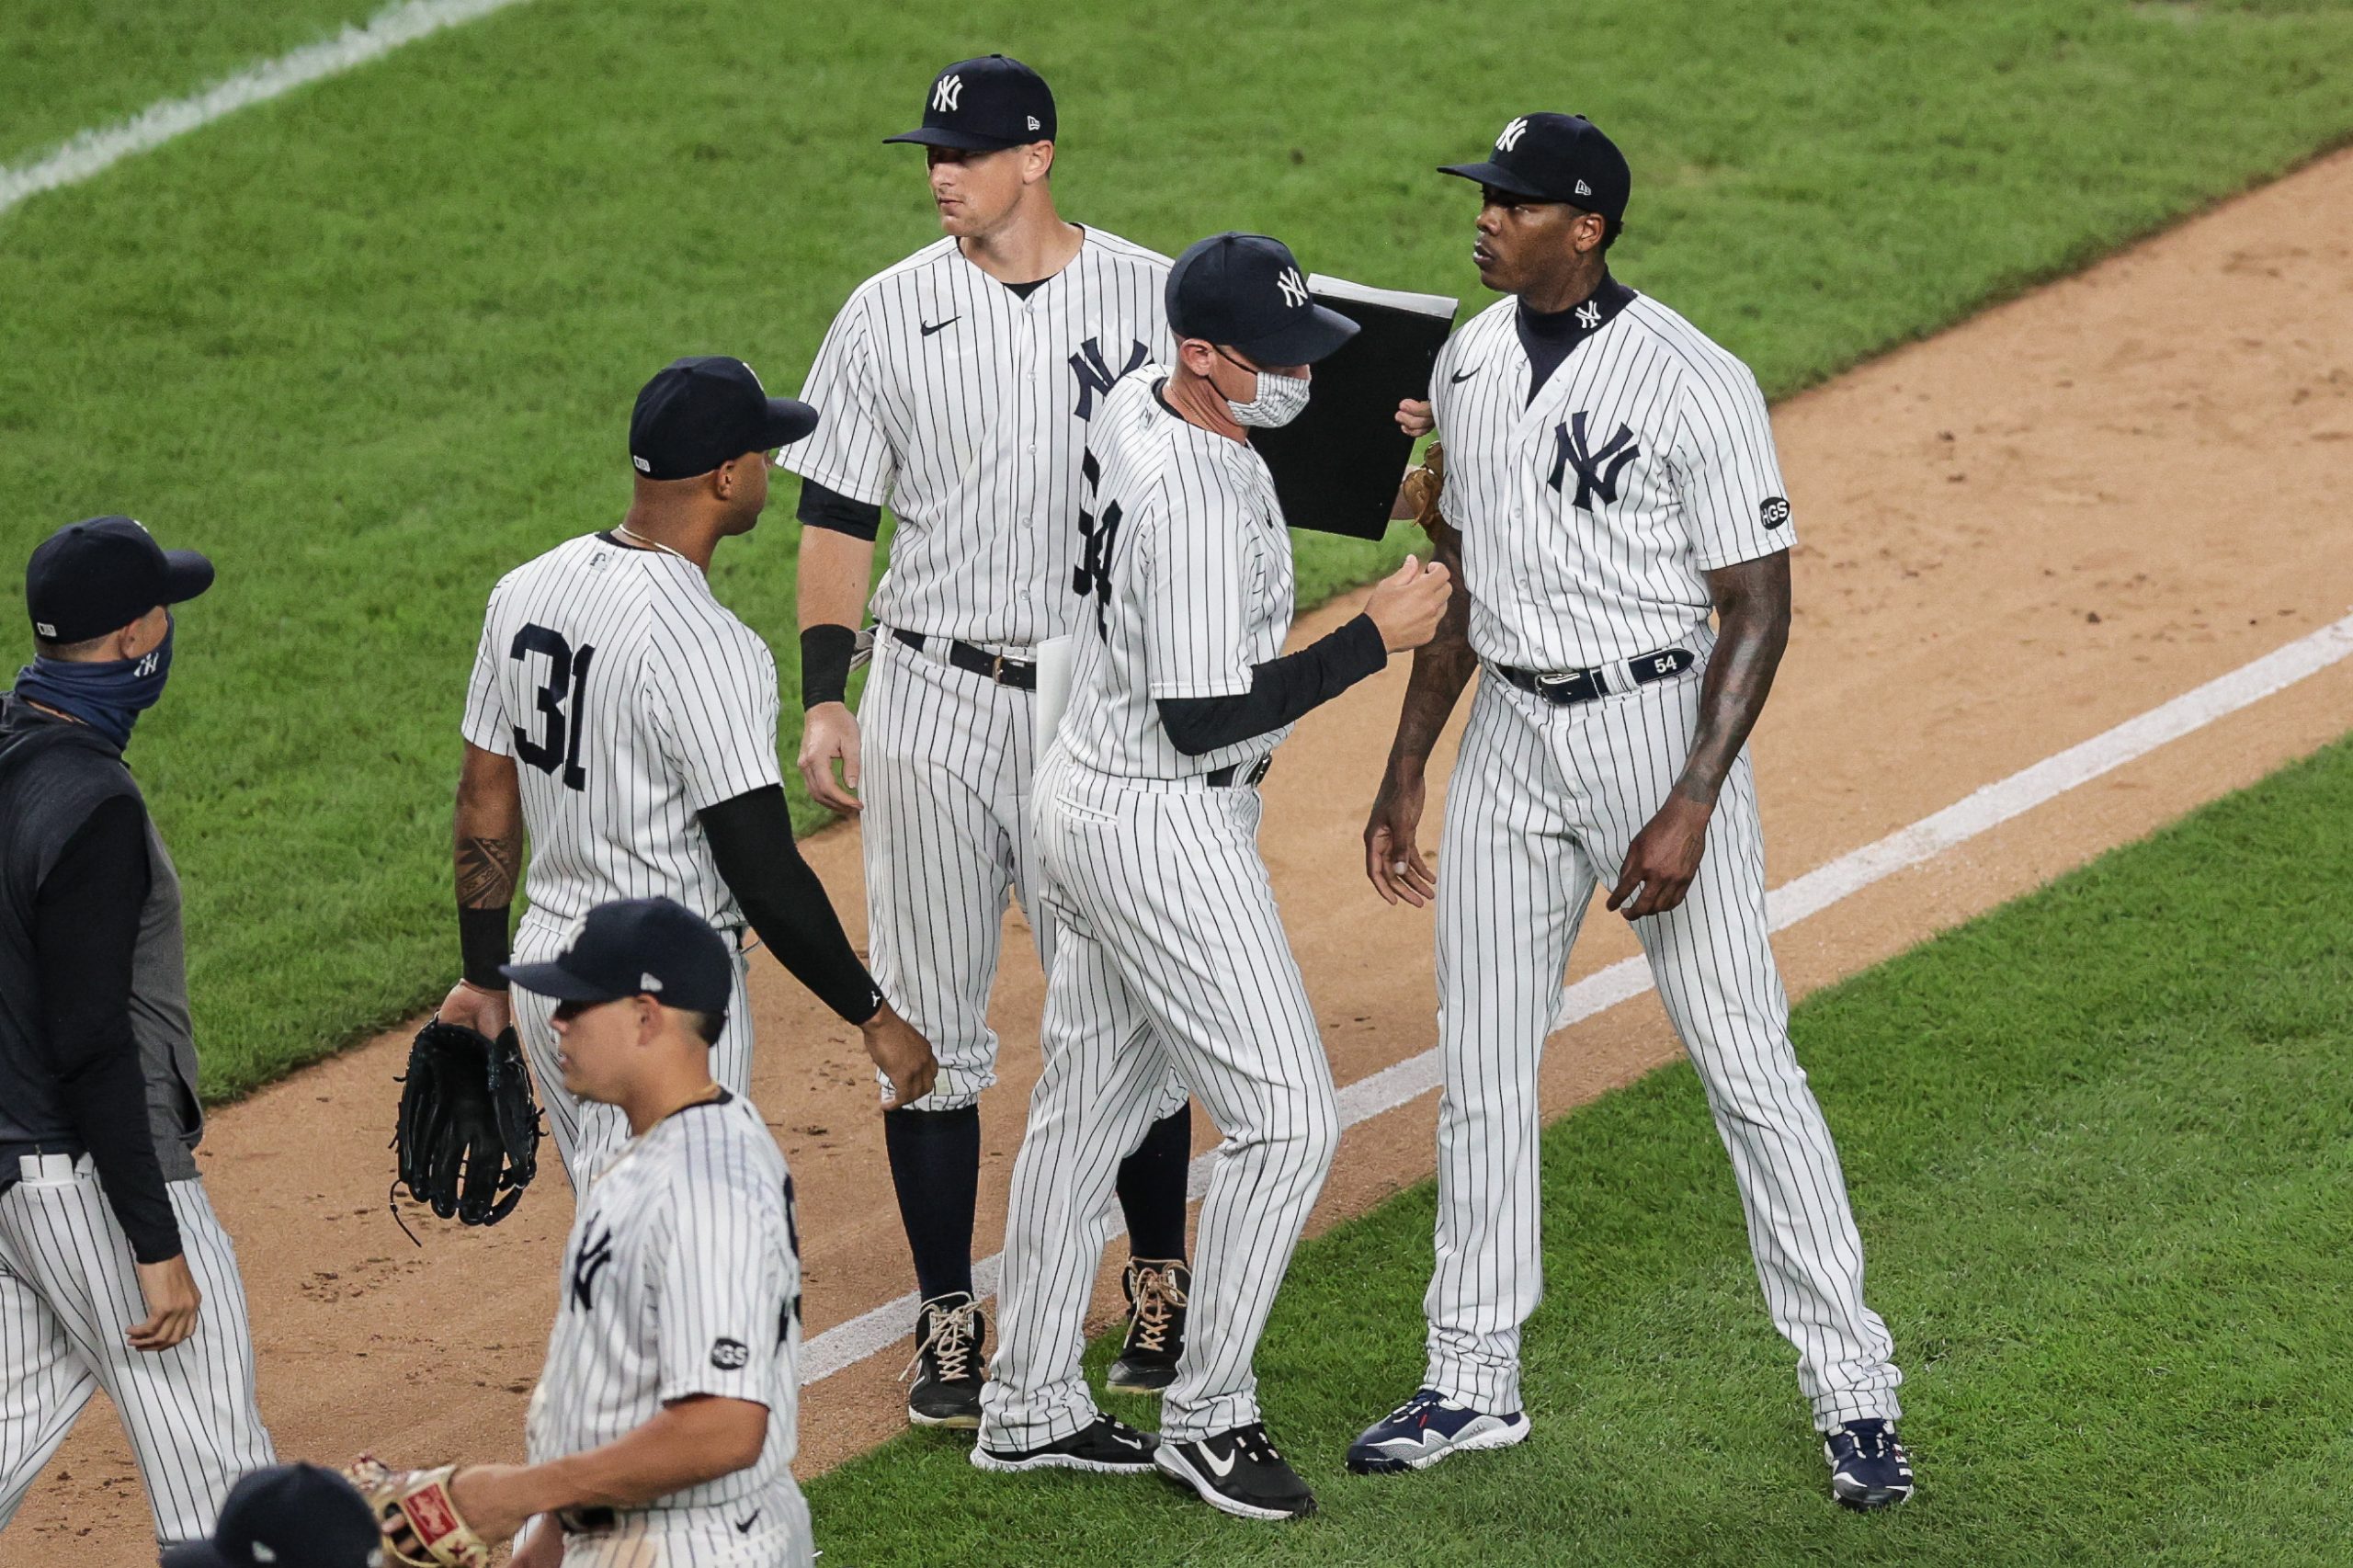 No love lost between Yankees, Rays ahead of heated ALDS